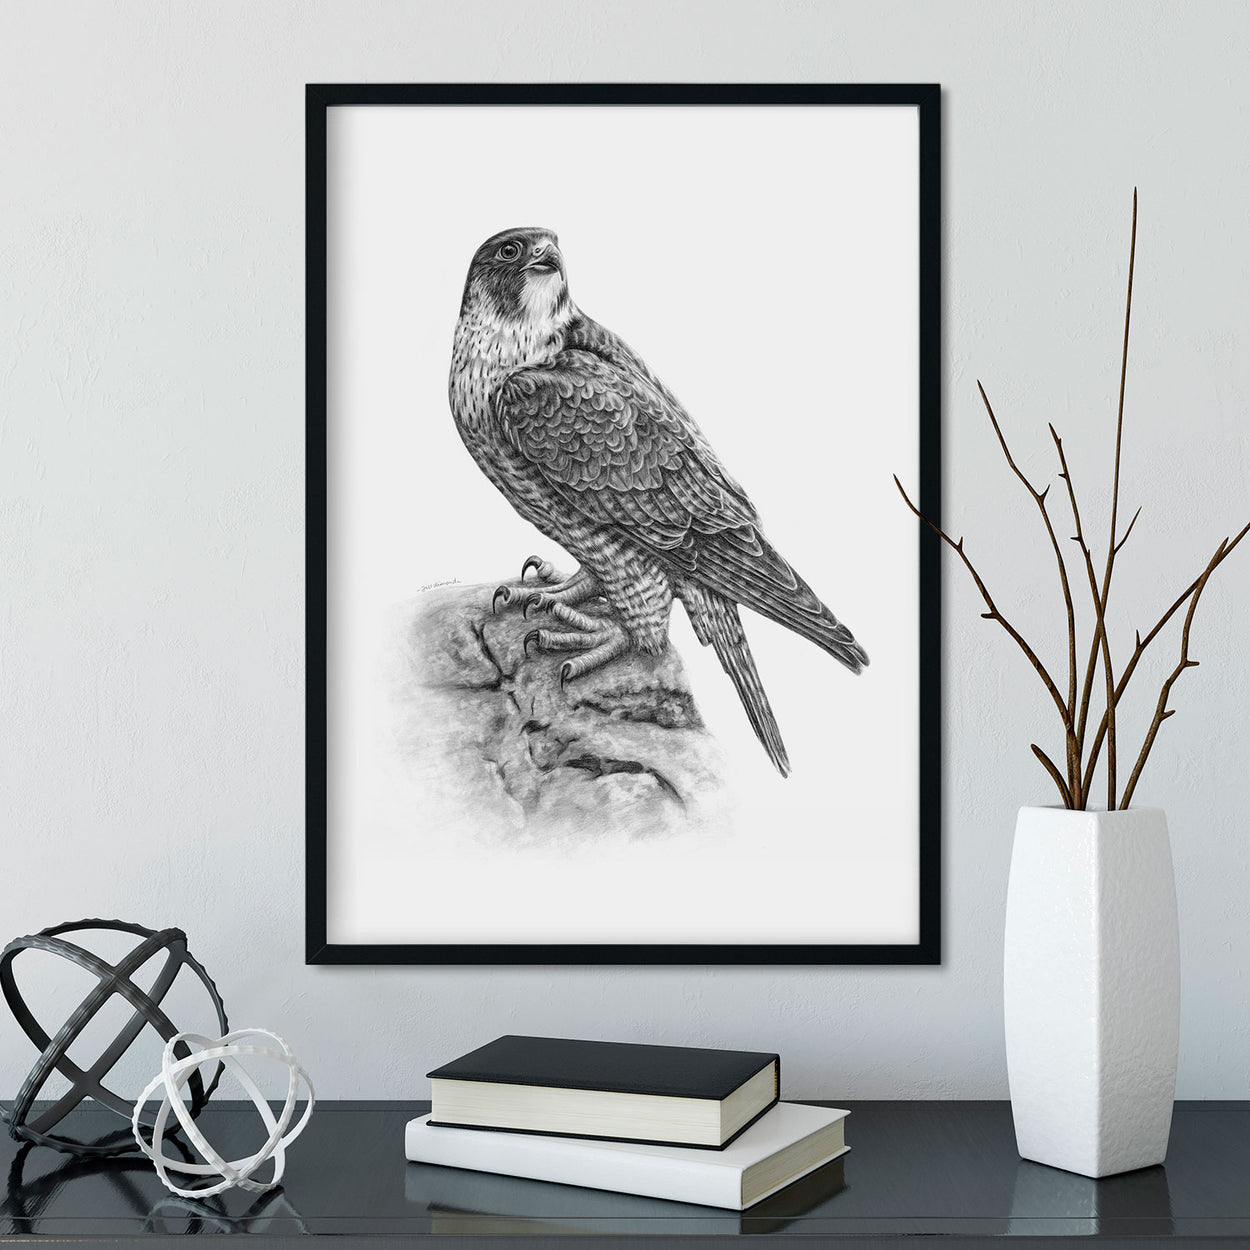 Peregrine Falcon Wall Art in Frame - The Thriving Wild